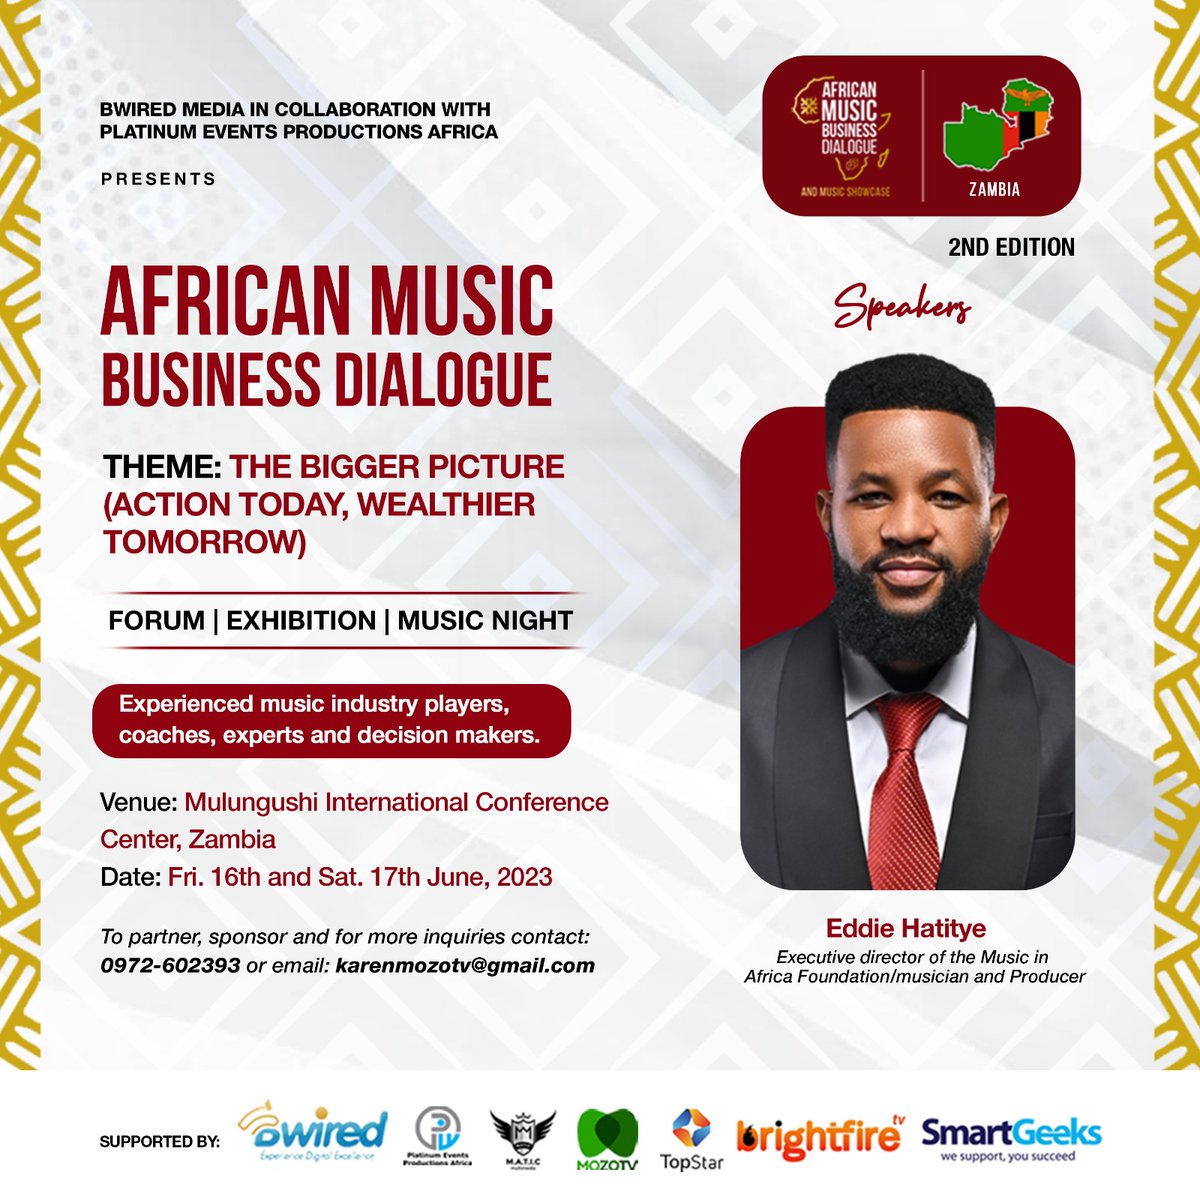 #MeetTheSpeakers @eddiehatitye 
Music Producer/Part of Music duo Epic Minds and Director of Music in Africa Foundation. Signup for #AMBDZambia at africanmusicbusinessdialogue.com